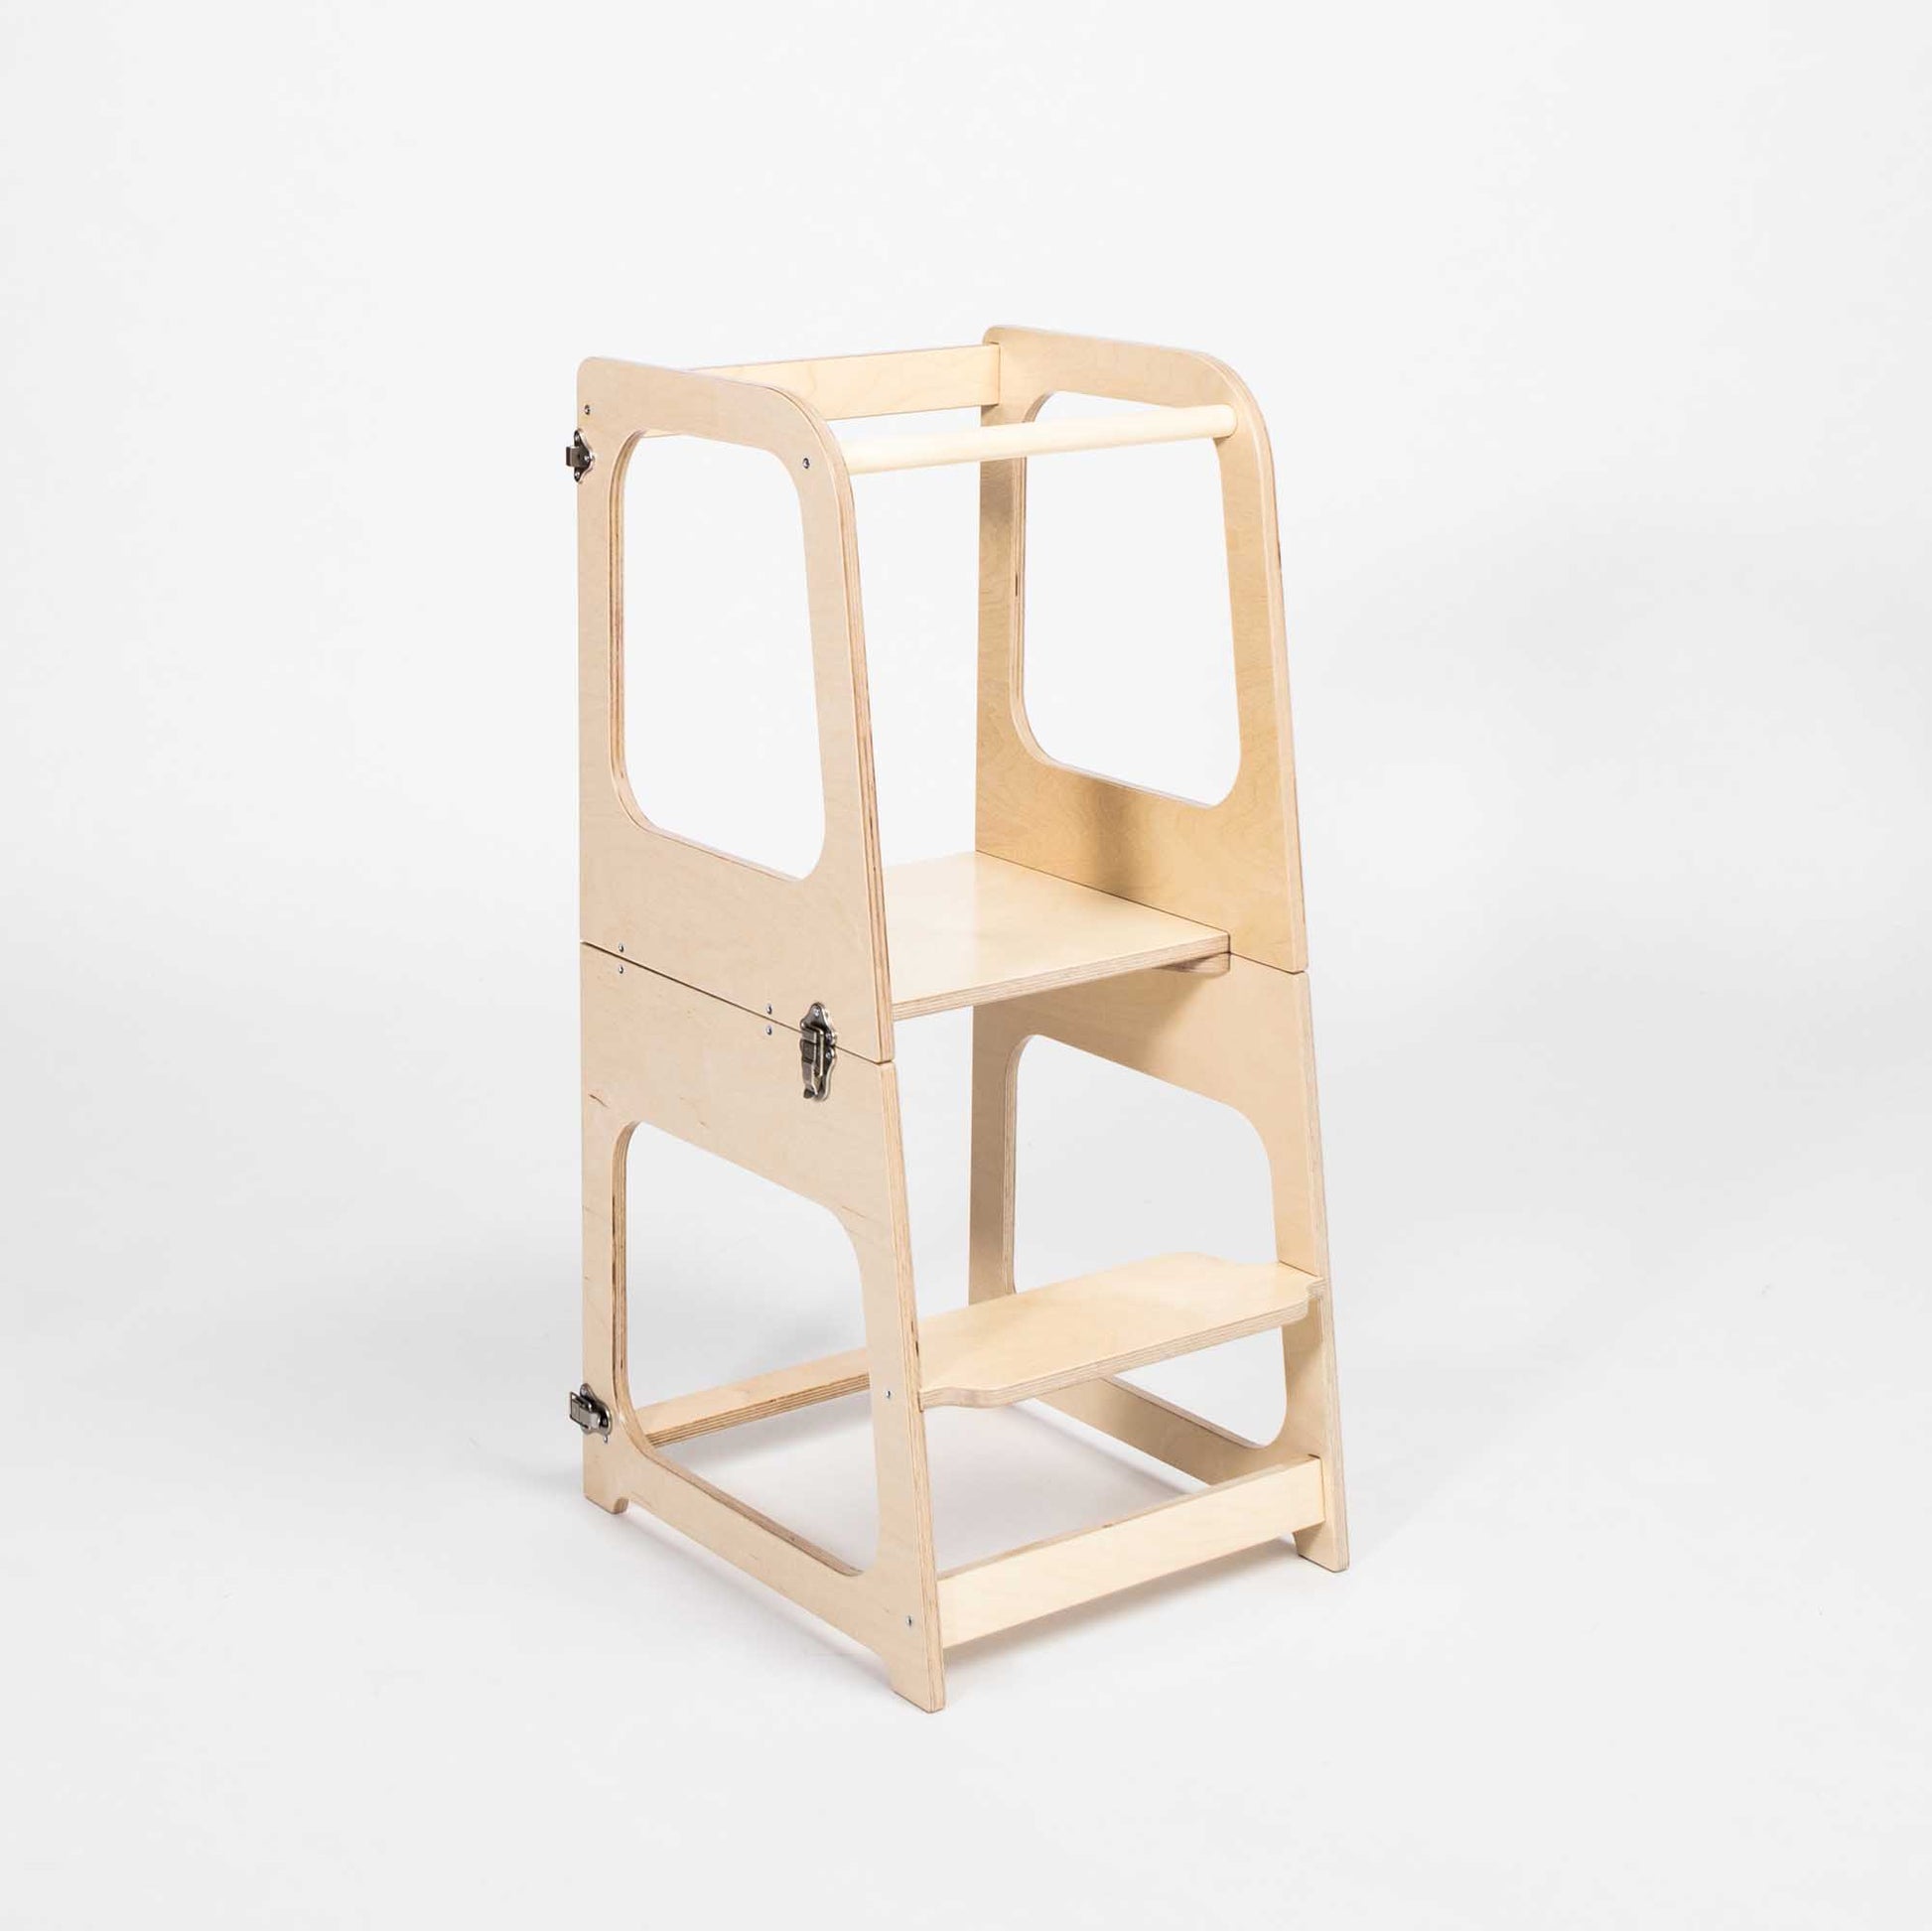 A sturdy 2-in-1 Convertible kitchen tower - table and chair with a shelf on top, perfect for toddlers.